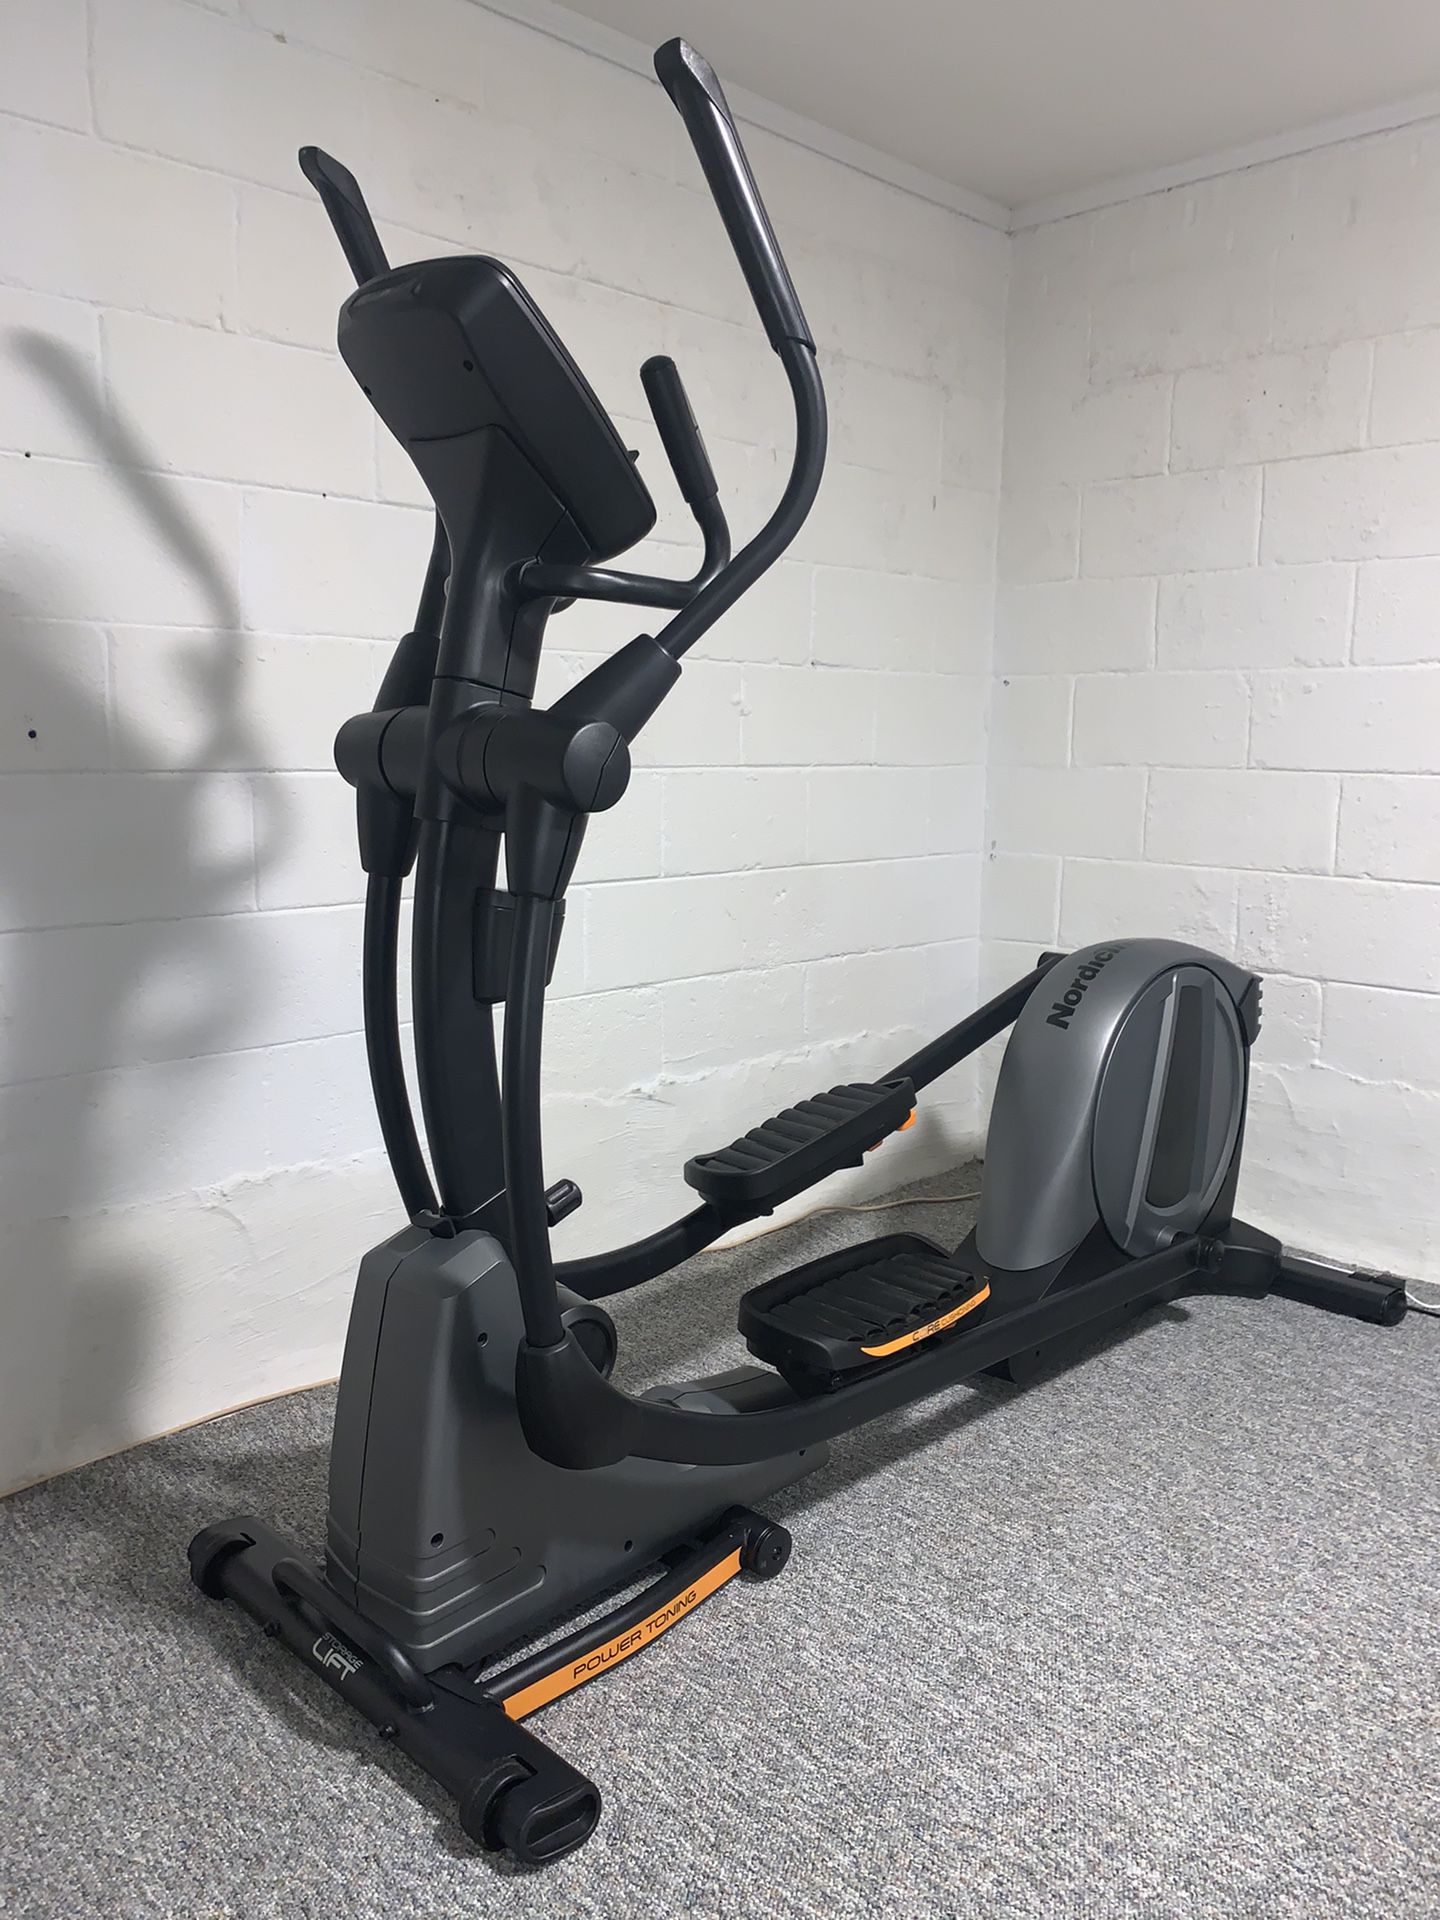 NordicTrack Elliptical Used A Couple Of Times With Incline And Resistance